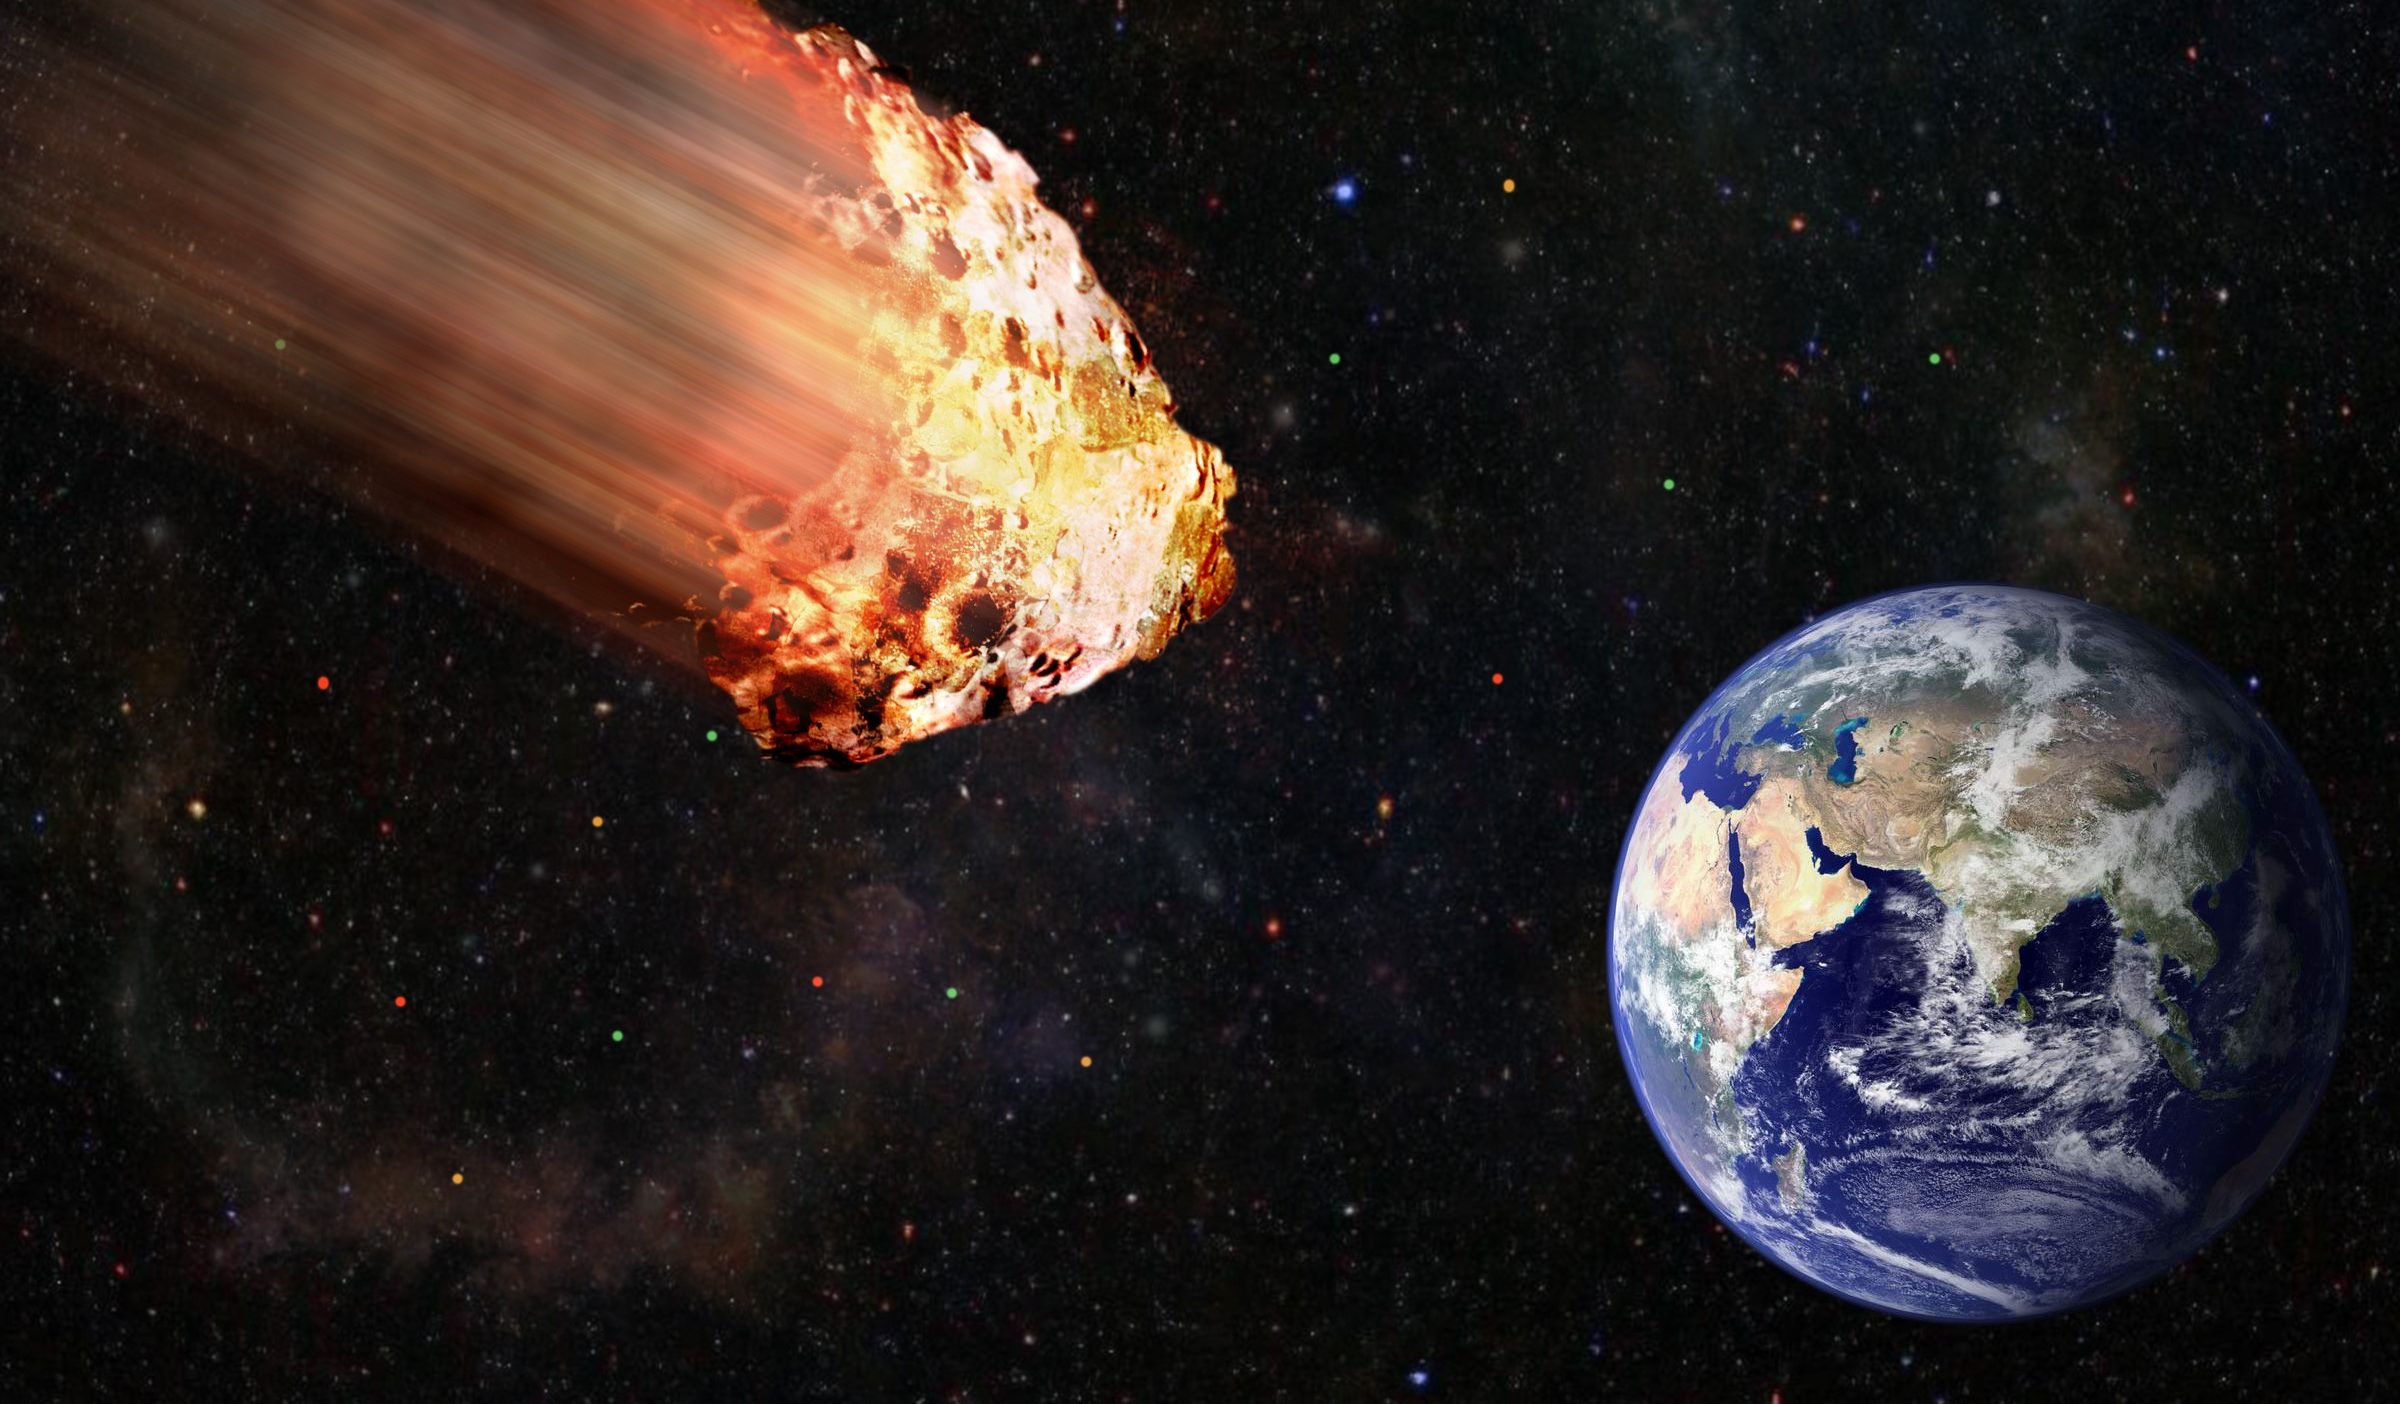 Astronomers noticed an asteroid as it was about to hit Earth - Asteroid 2022 EB5. Credit: DepositPhotos